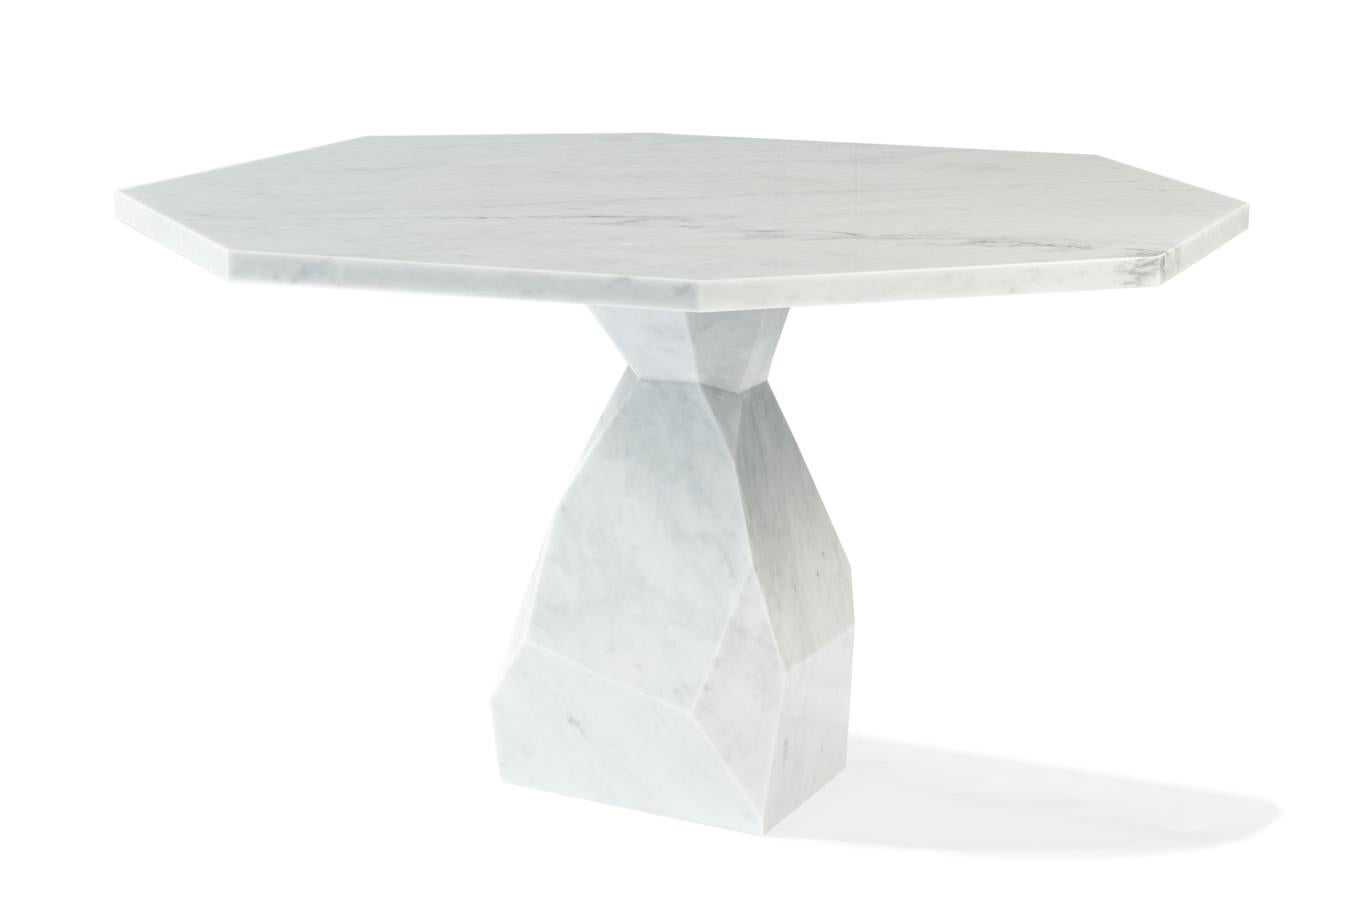 Encapsulating the commanding presence of Nature, this dining table is a bold design statement. Made from a single block of marble.
Marble: Carrara, Negro Marquina, Estremoz or Estremoz Rose  in polished finishing.
Size can be customized to fit your